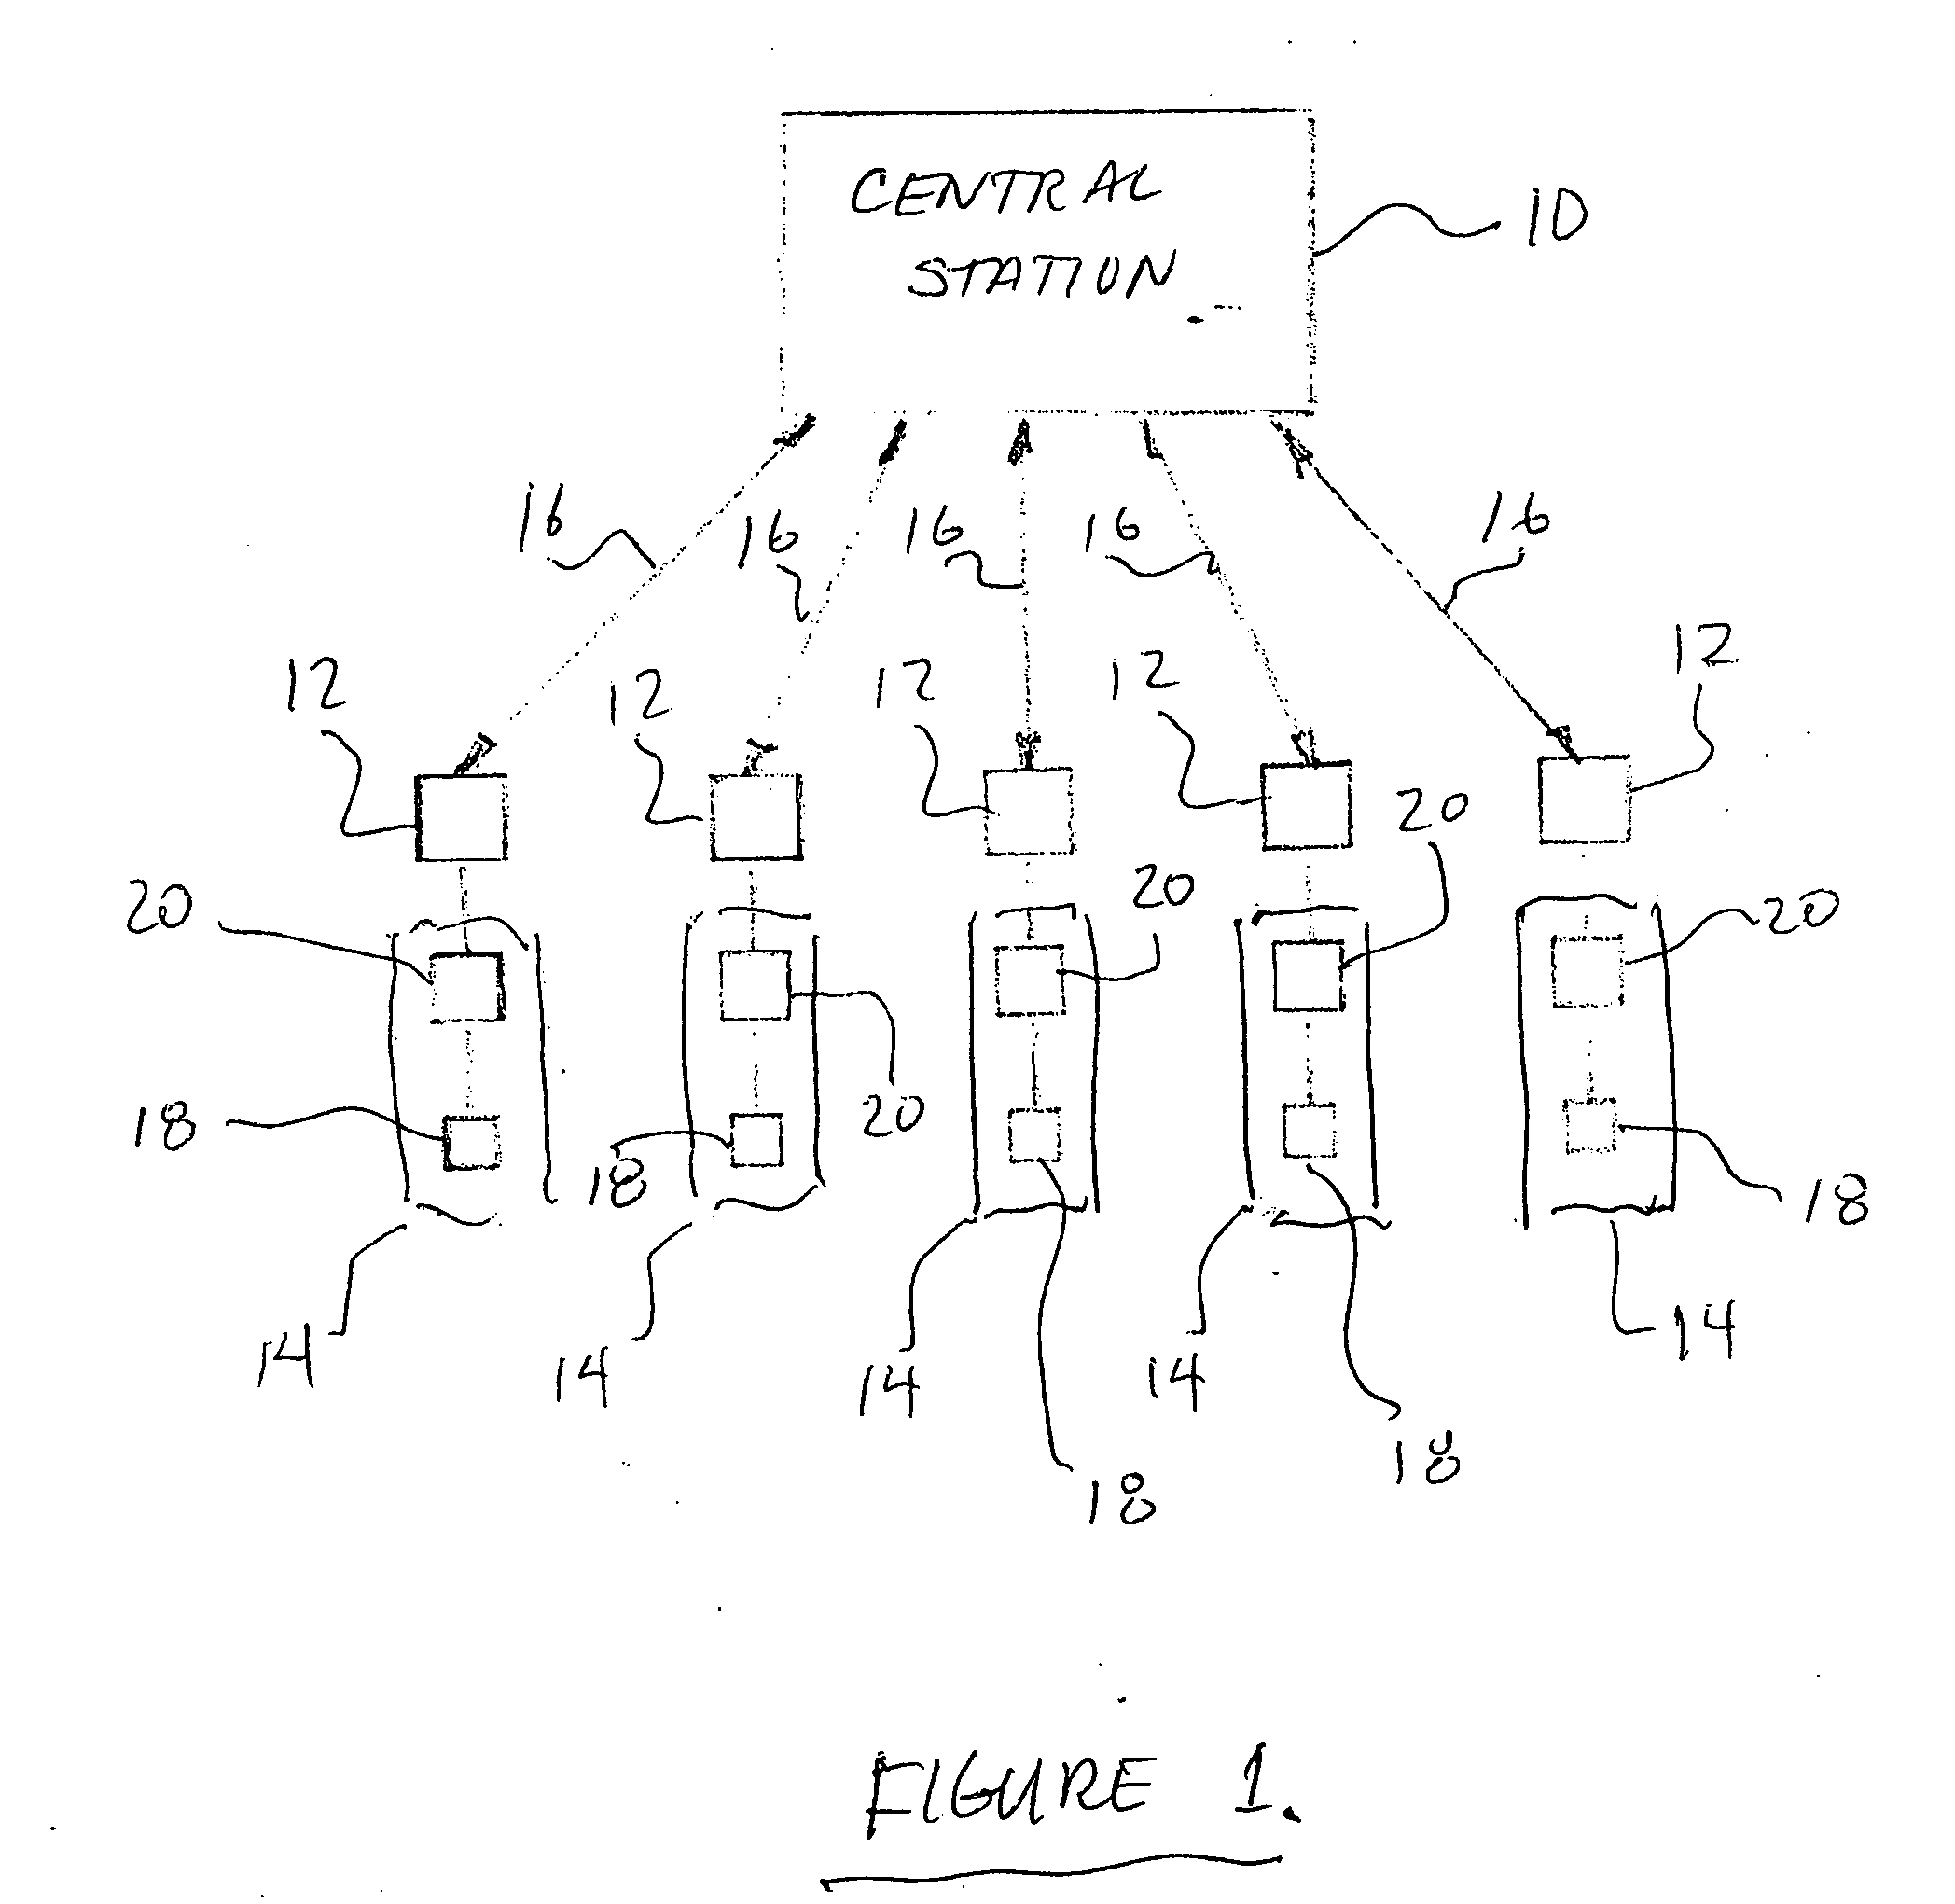 Monitoring and security system and method